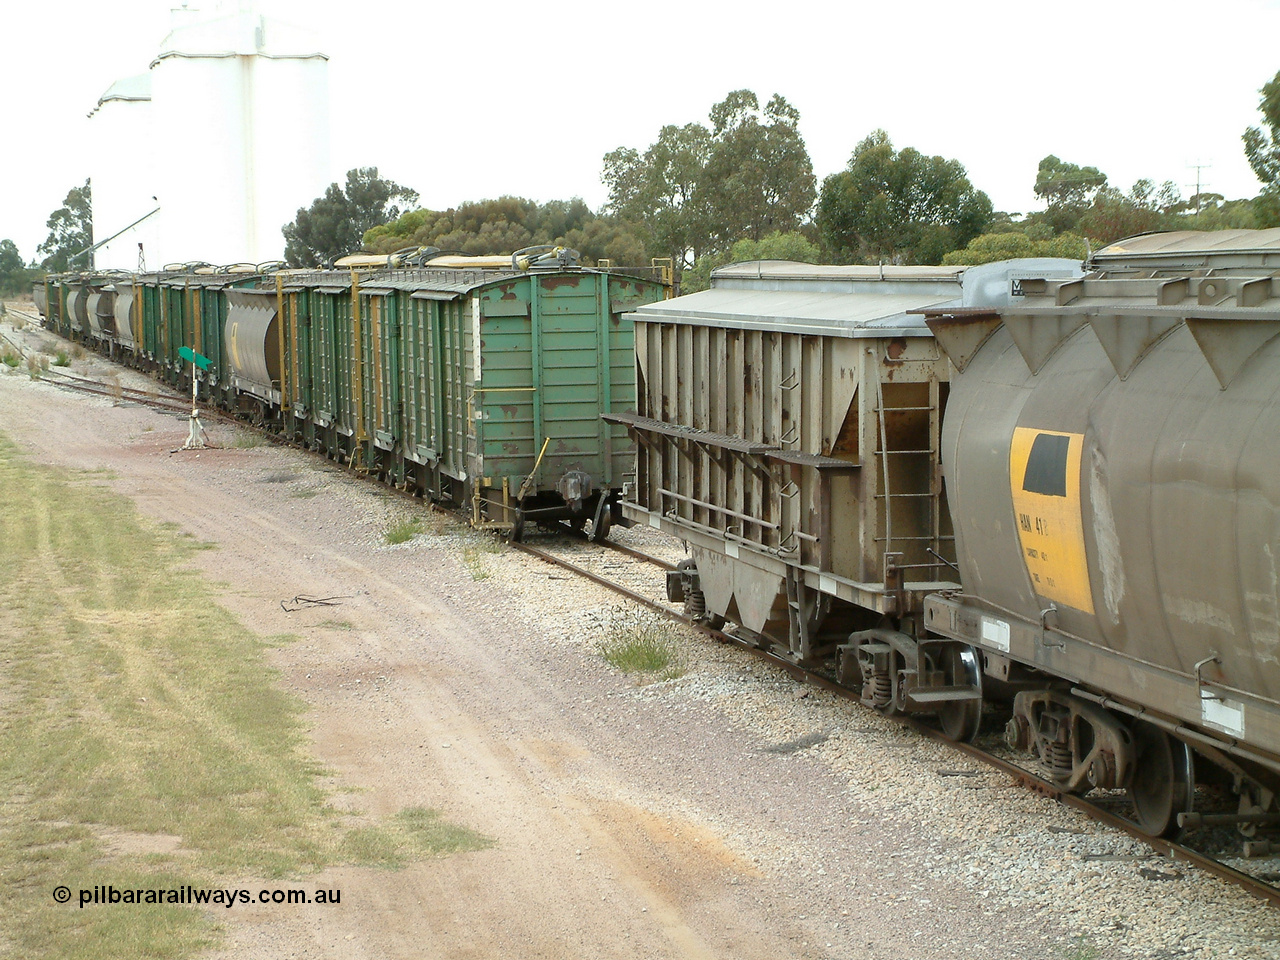 030407 100630
Minnipa, as the front portion shunts away, the make-up of the consist is plain to see. HAN class bogie grain waggon HAN 41, a HBN bogie grain - ballast waggon, and then a motley collection of ENHV, HAN, HBN, HCN and ENHG to round out the consist. 7th April, 2003.
